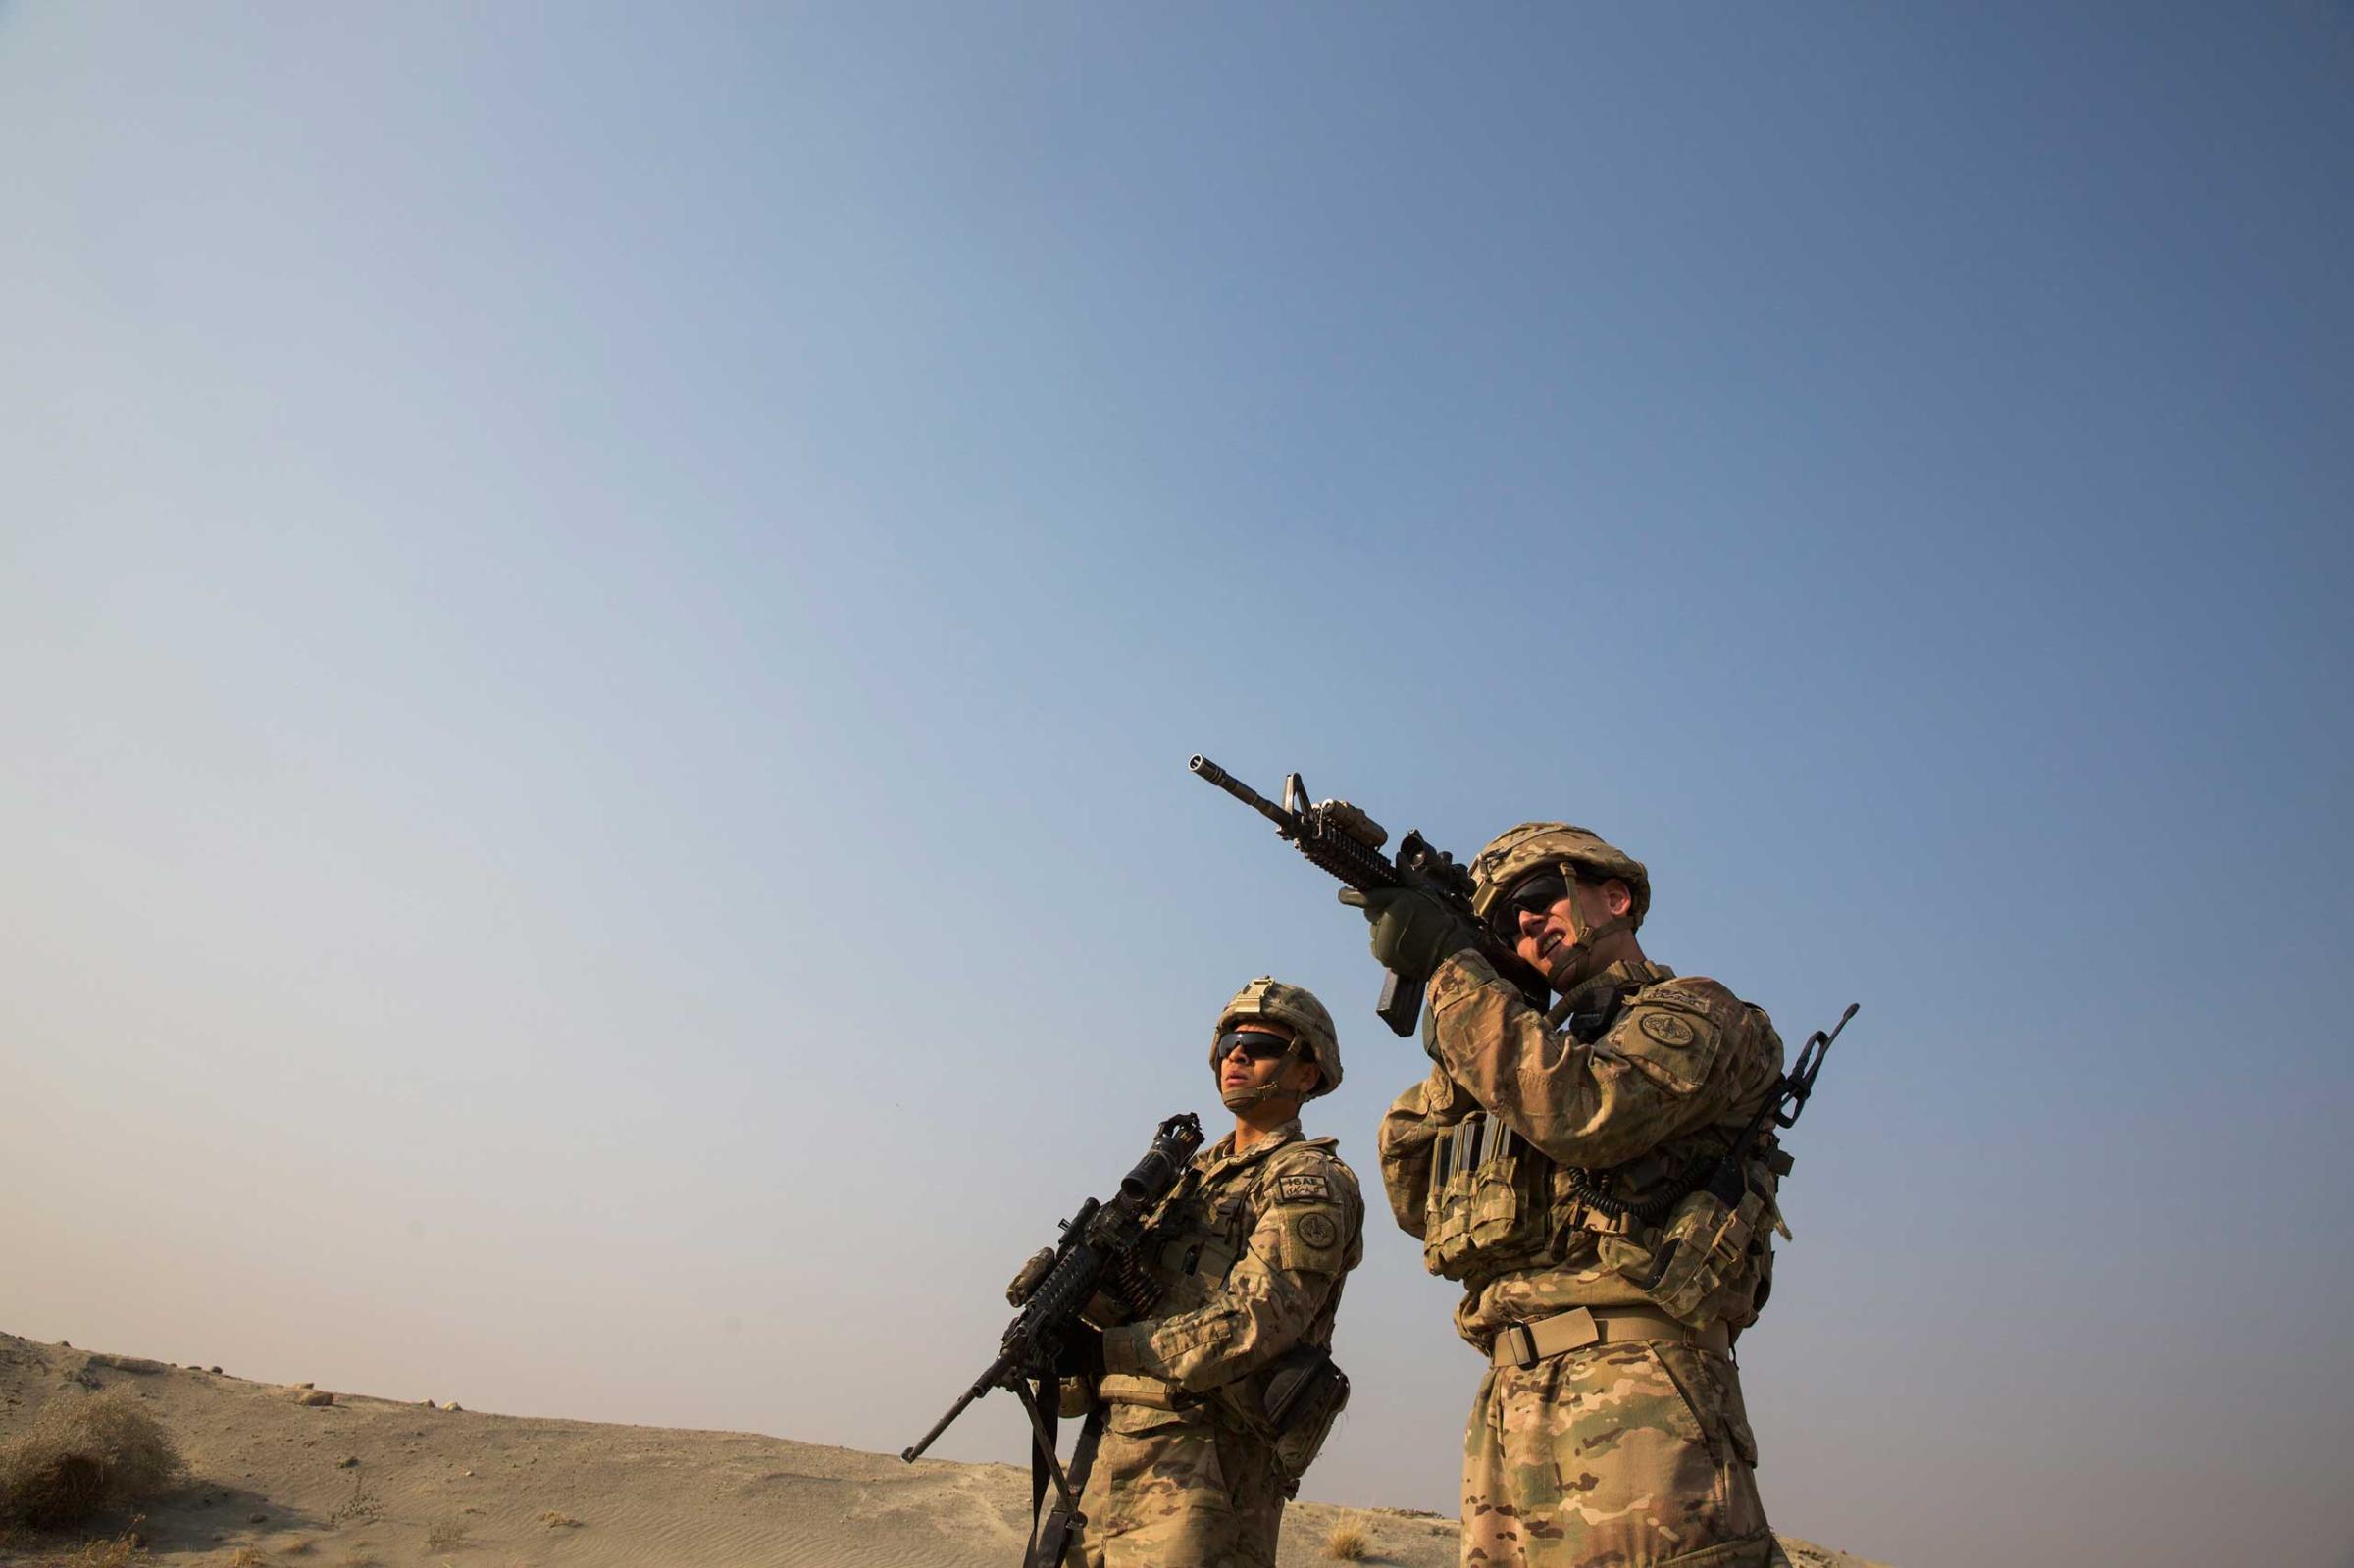 A U.S. soldier from the 3rd Cavalry Regiment uses the optic on his rifle to observe Afghans in the distance, near forward operating base Gamberi, in the Laghman province of Afghanistan